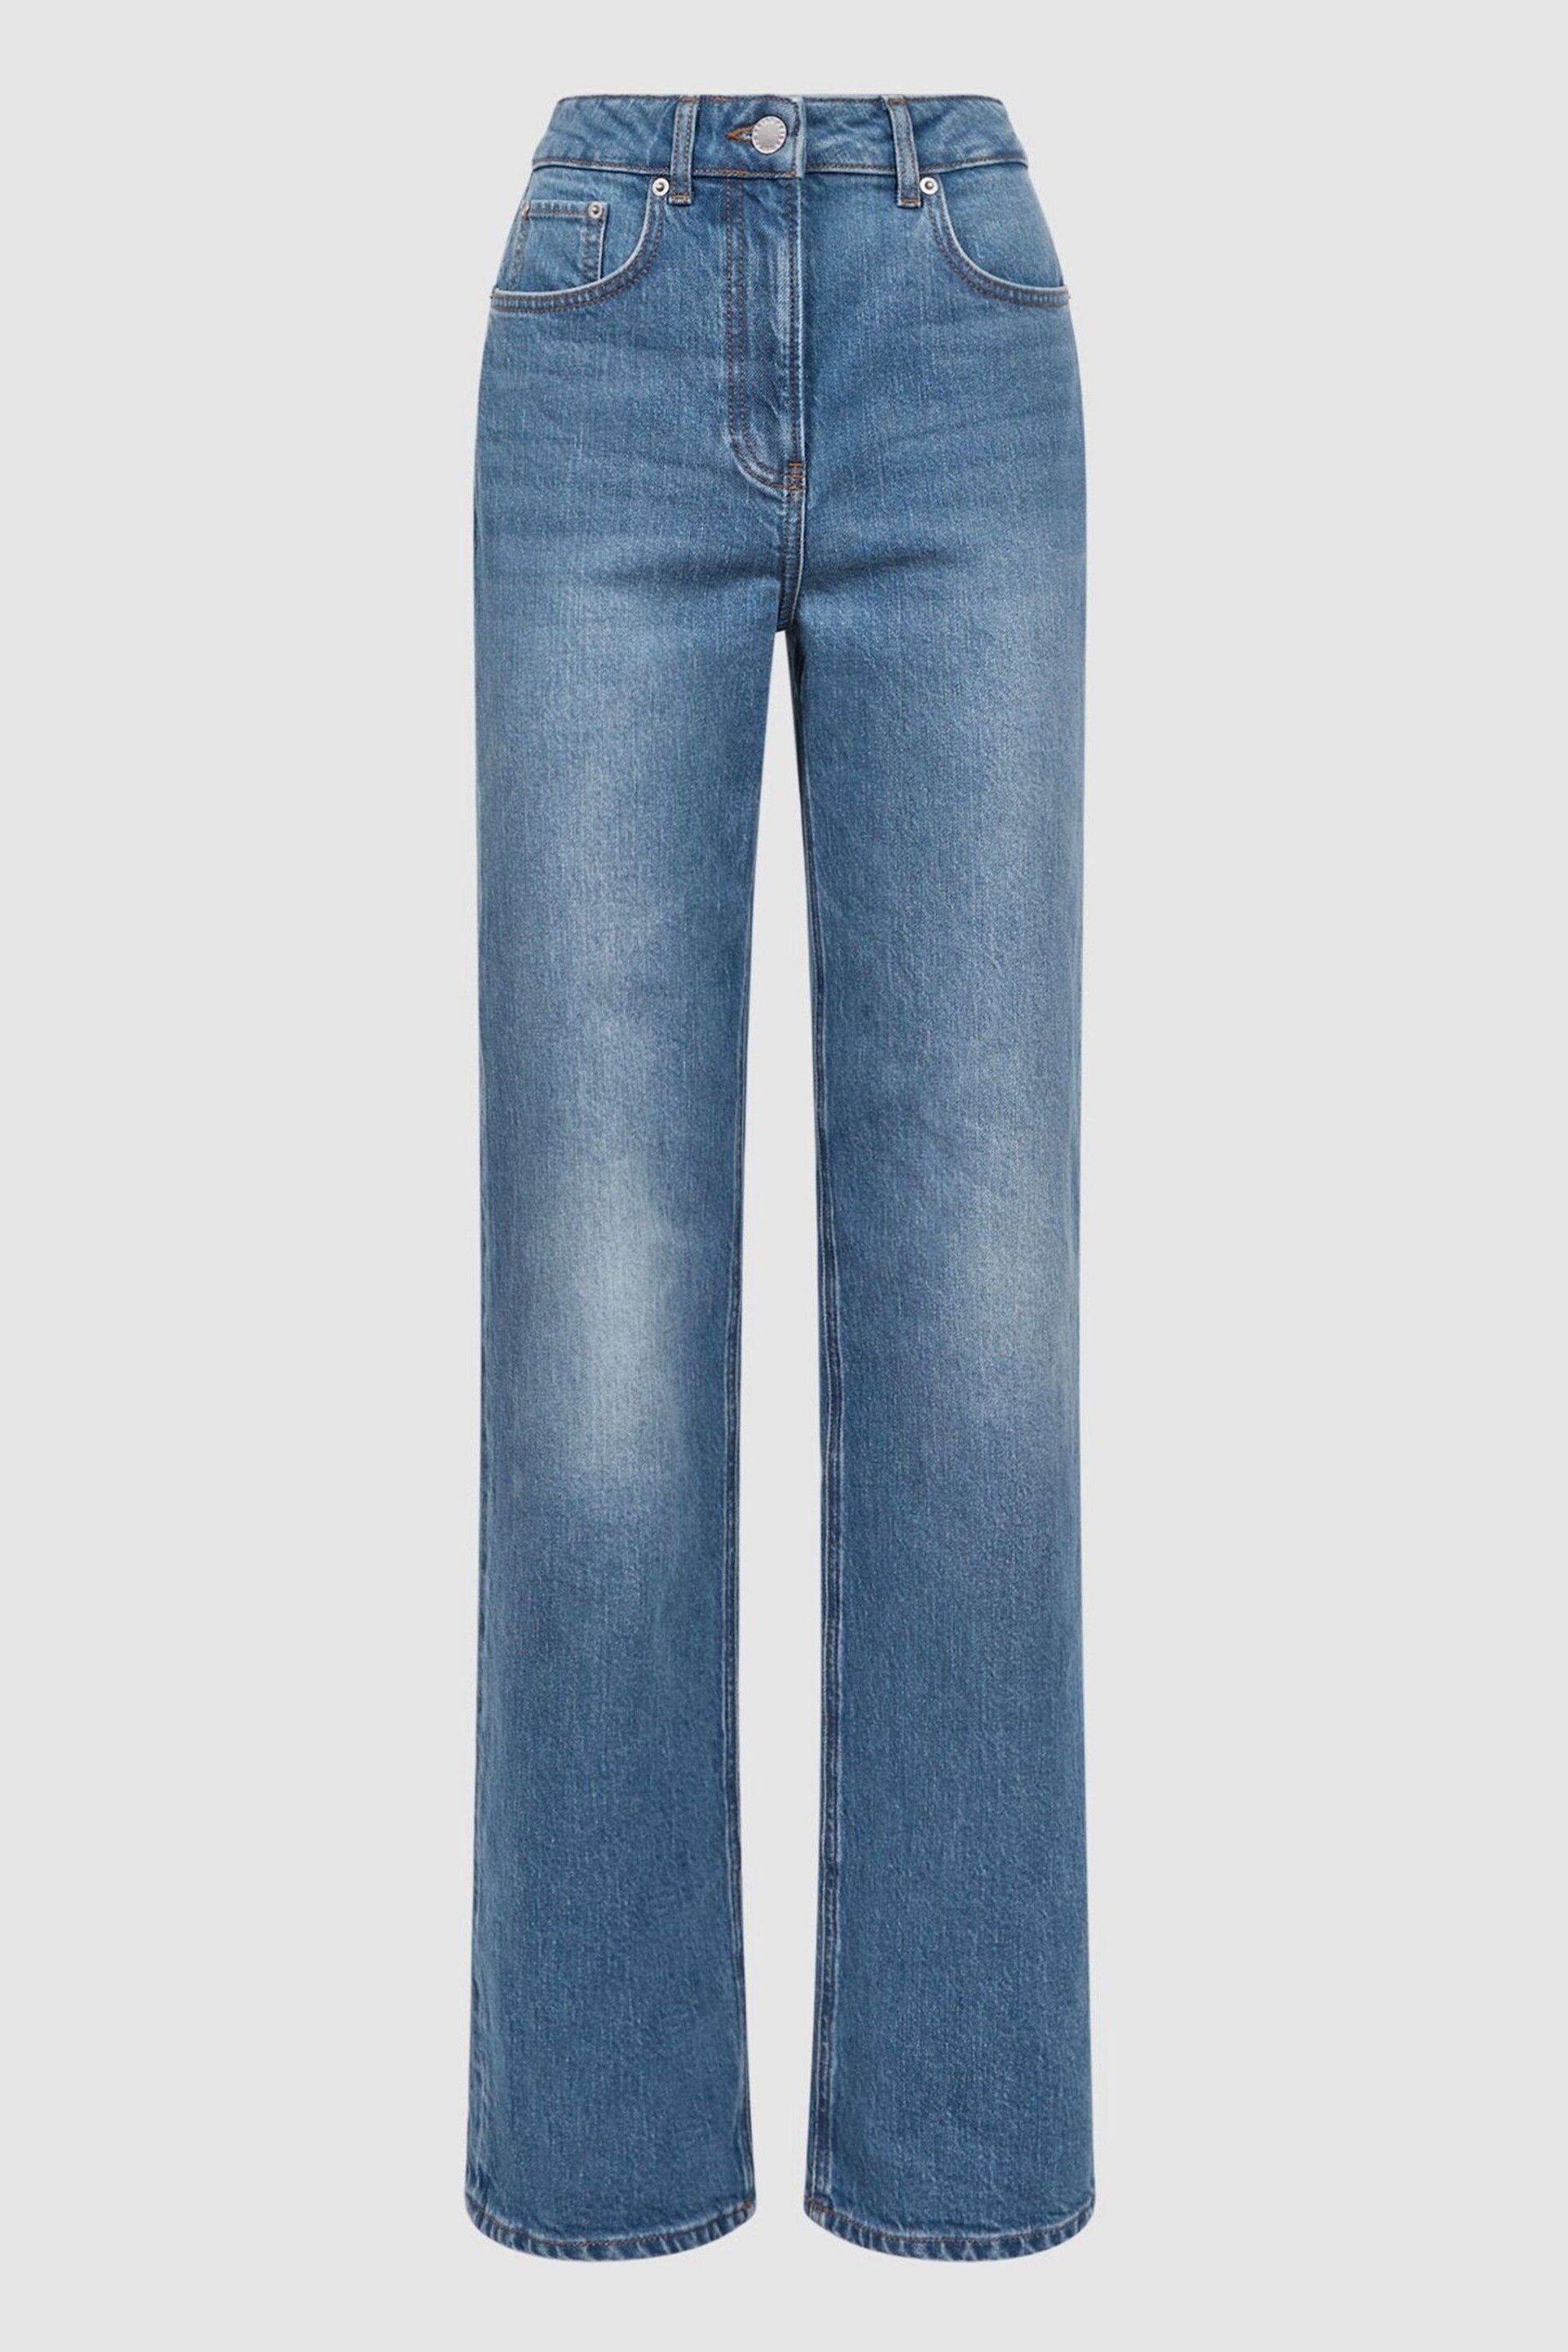 Reiss Mid Blue Marion Mid Rise Wide Leg Jeans - Image 2 of 4